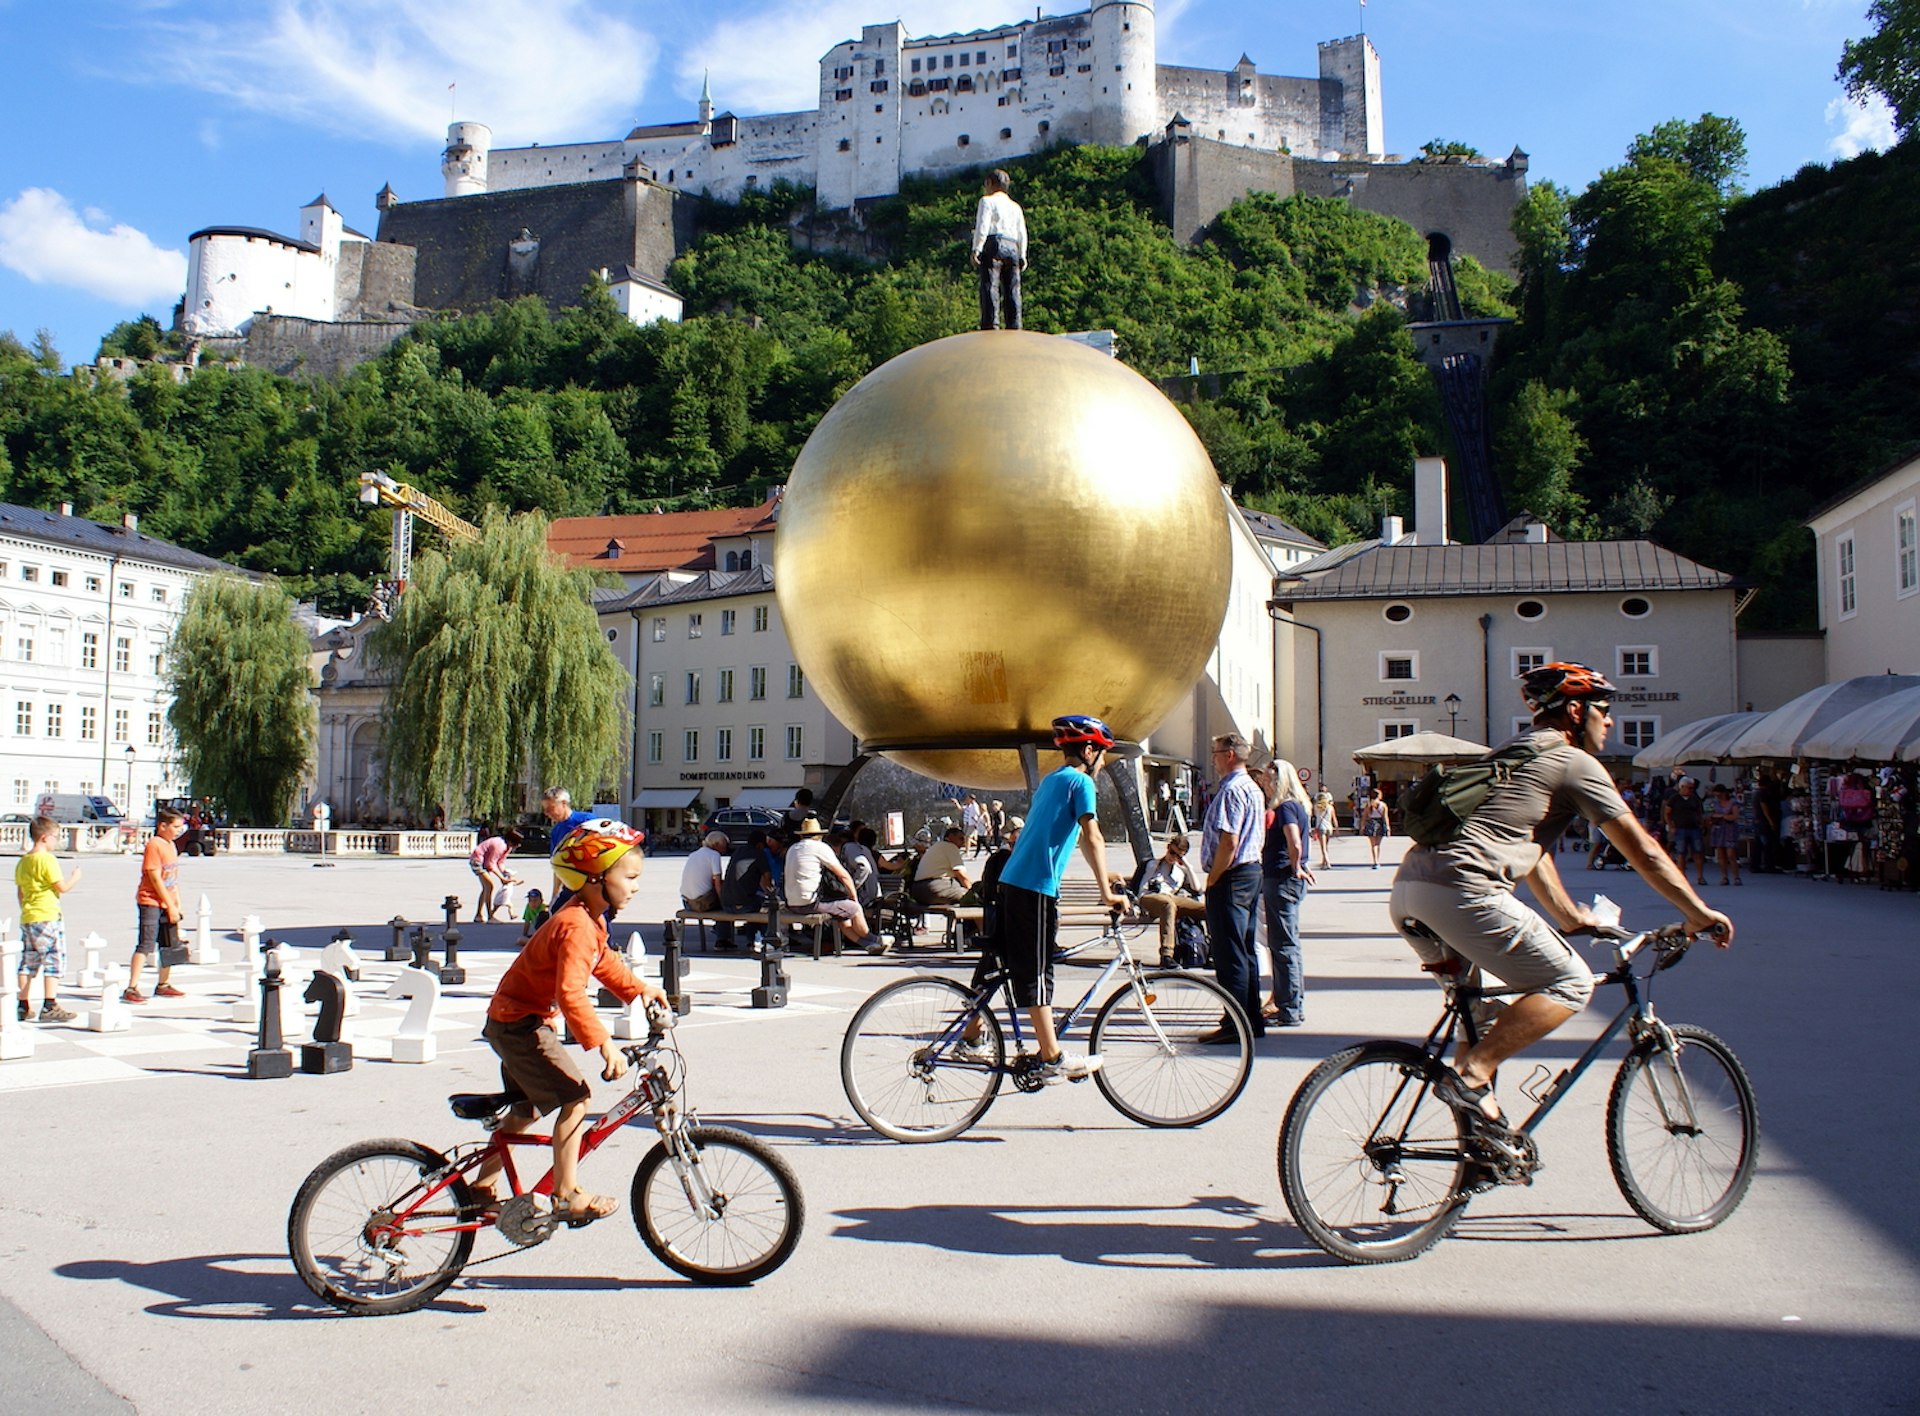 Cyclists pedal past the “Sphaera” sculpture and Hohensalzburg Fortress in the distance in historic Salzburg, Austria, Europe